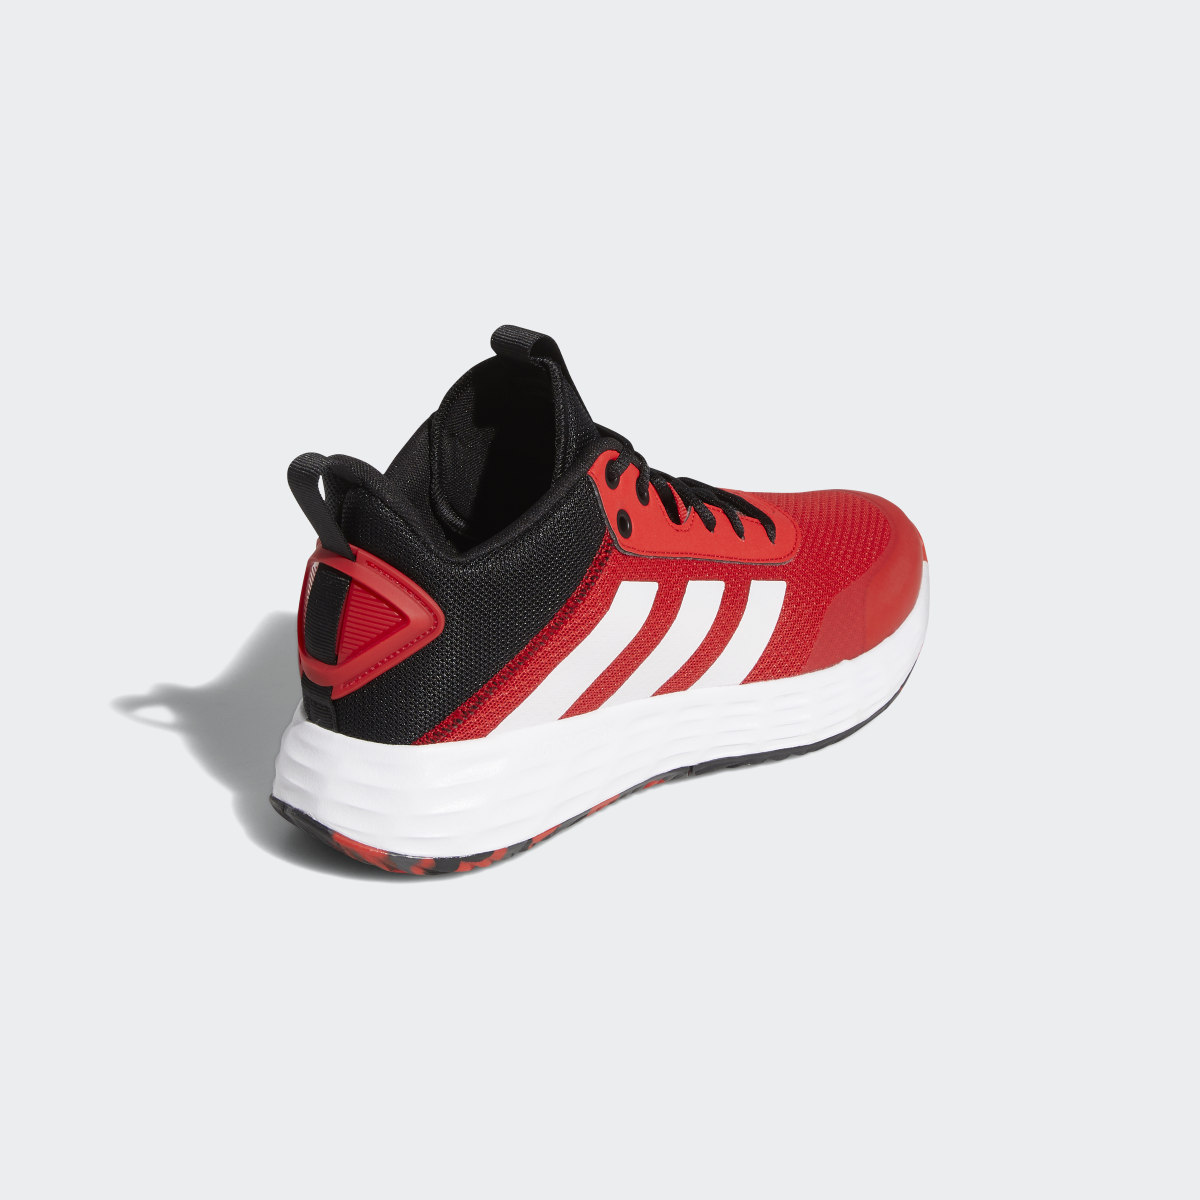 Adidas Ownthegame Basketball Shoes. 6